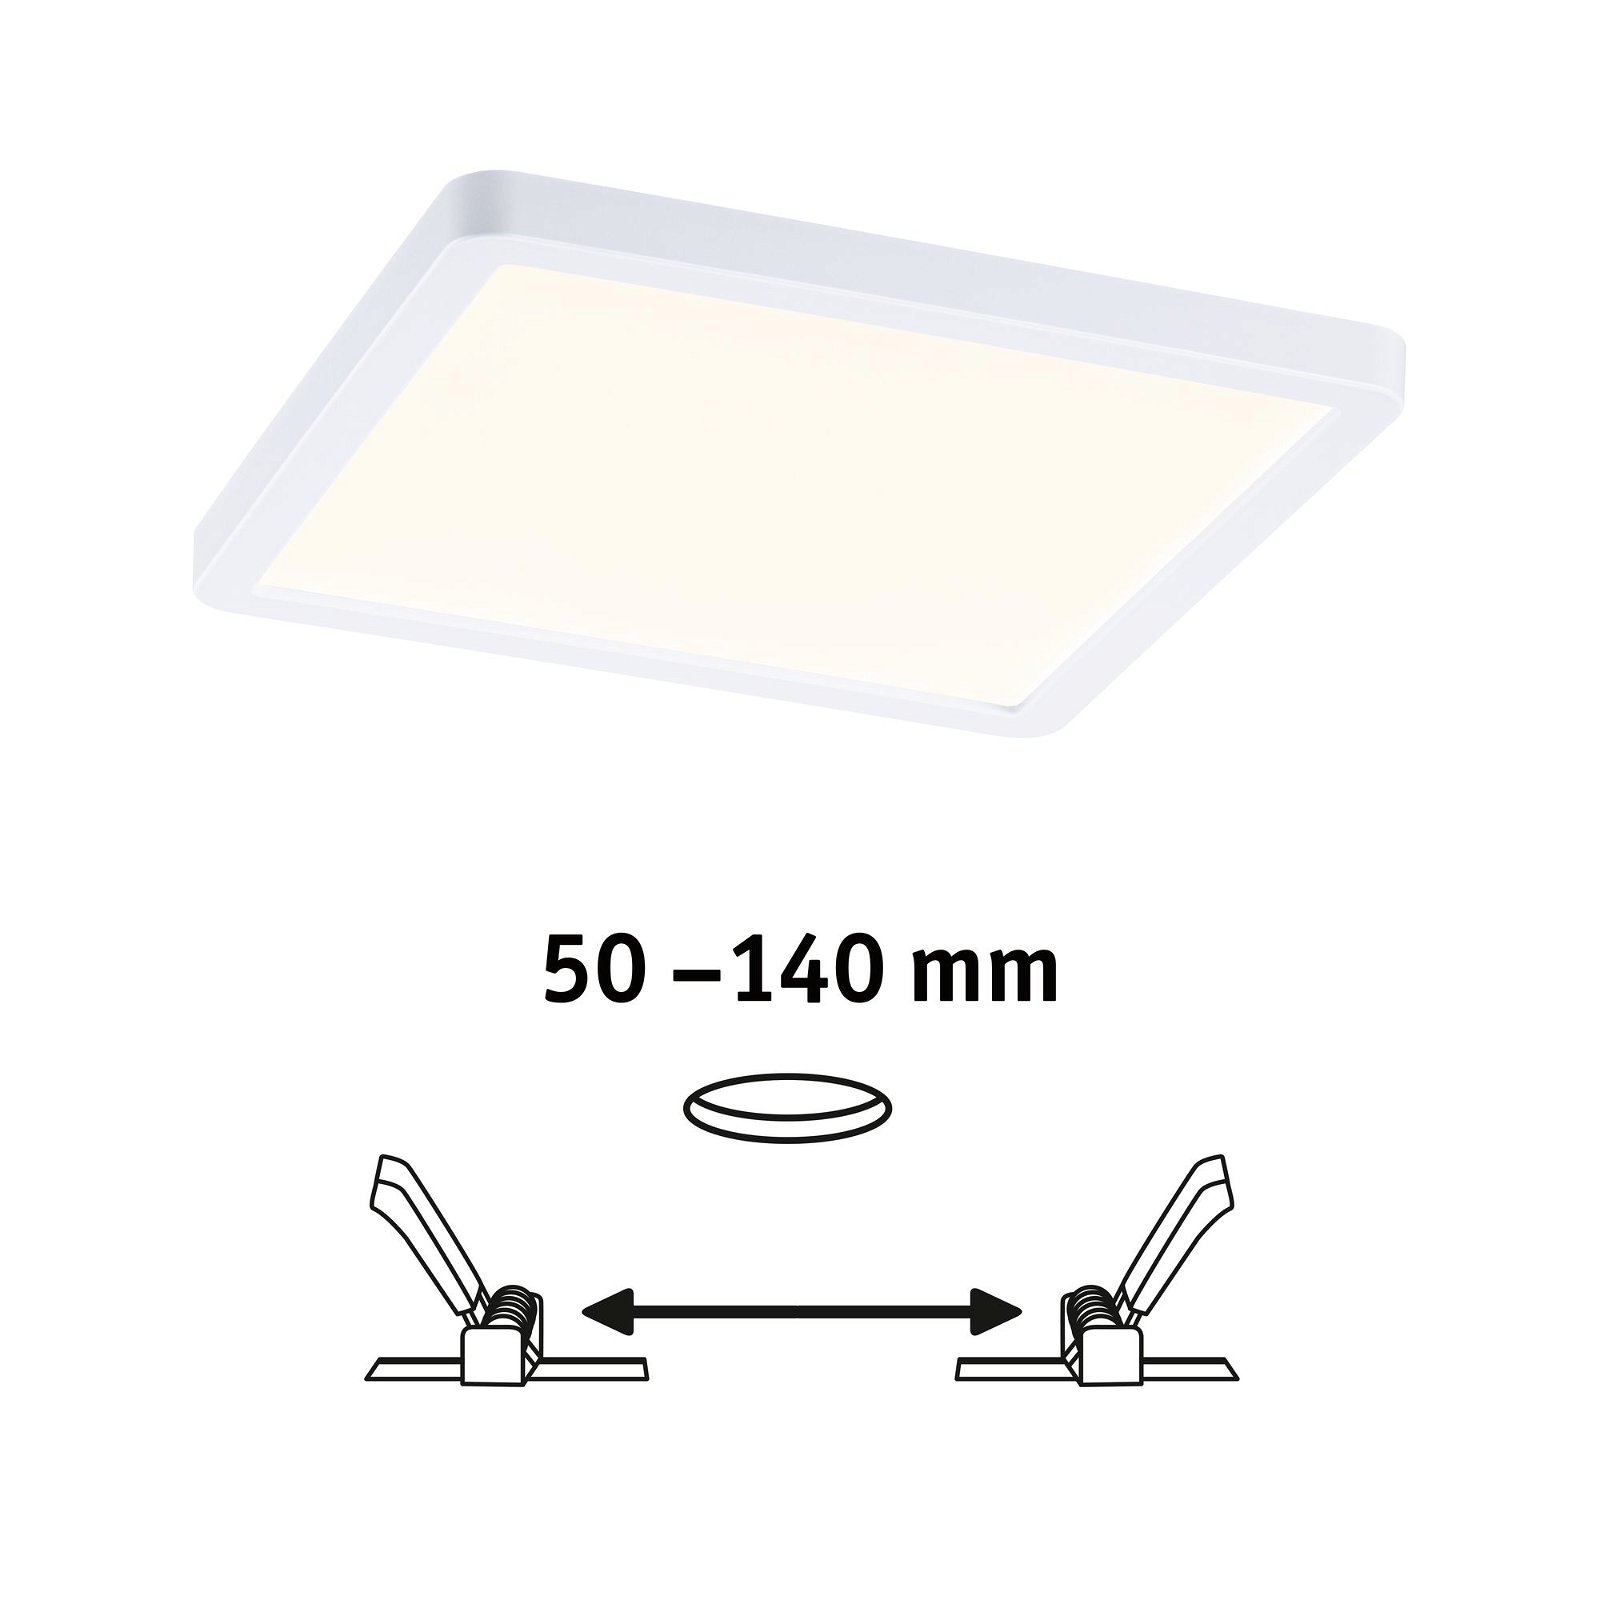 VariFit LED Recessed panel Smart Home Zigbee Areo IP44 square 175x175mm 13W 1200lm Tunable White White dimmable